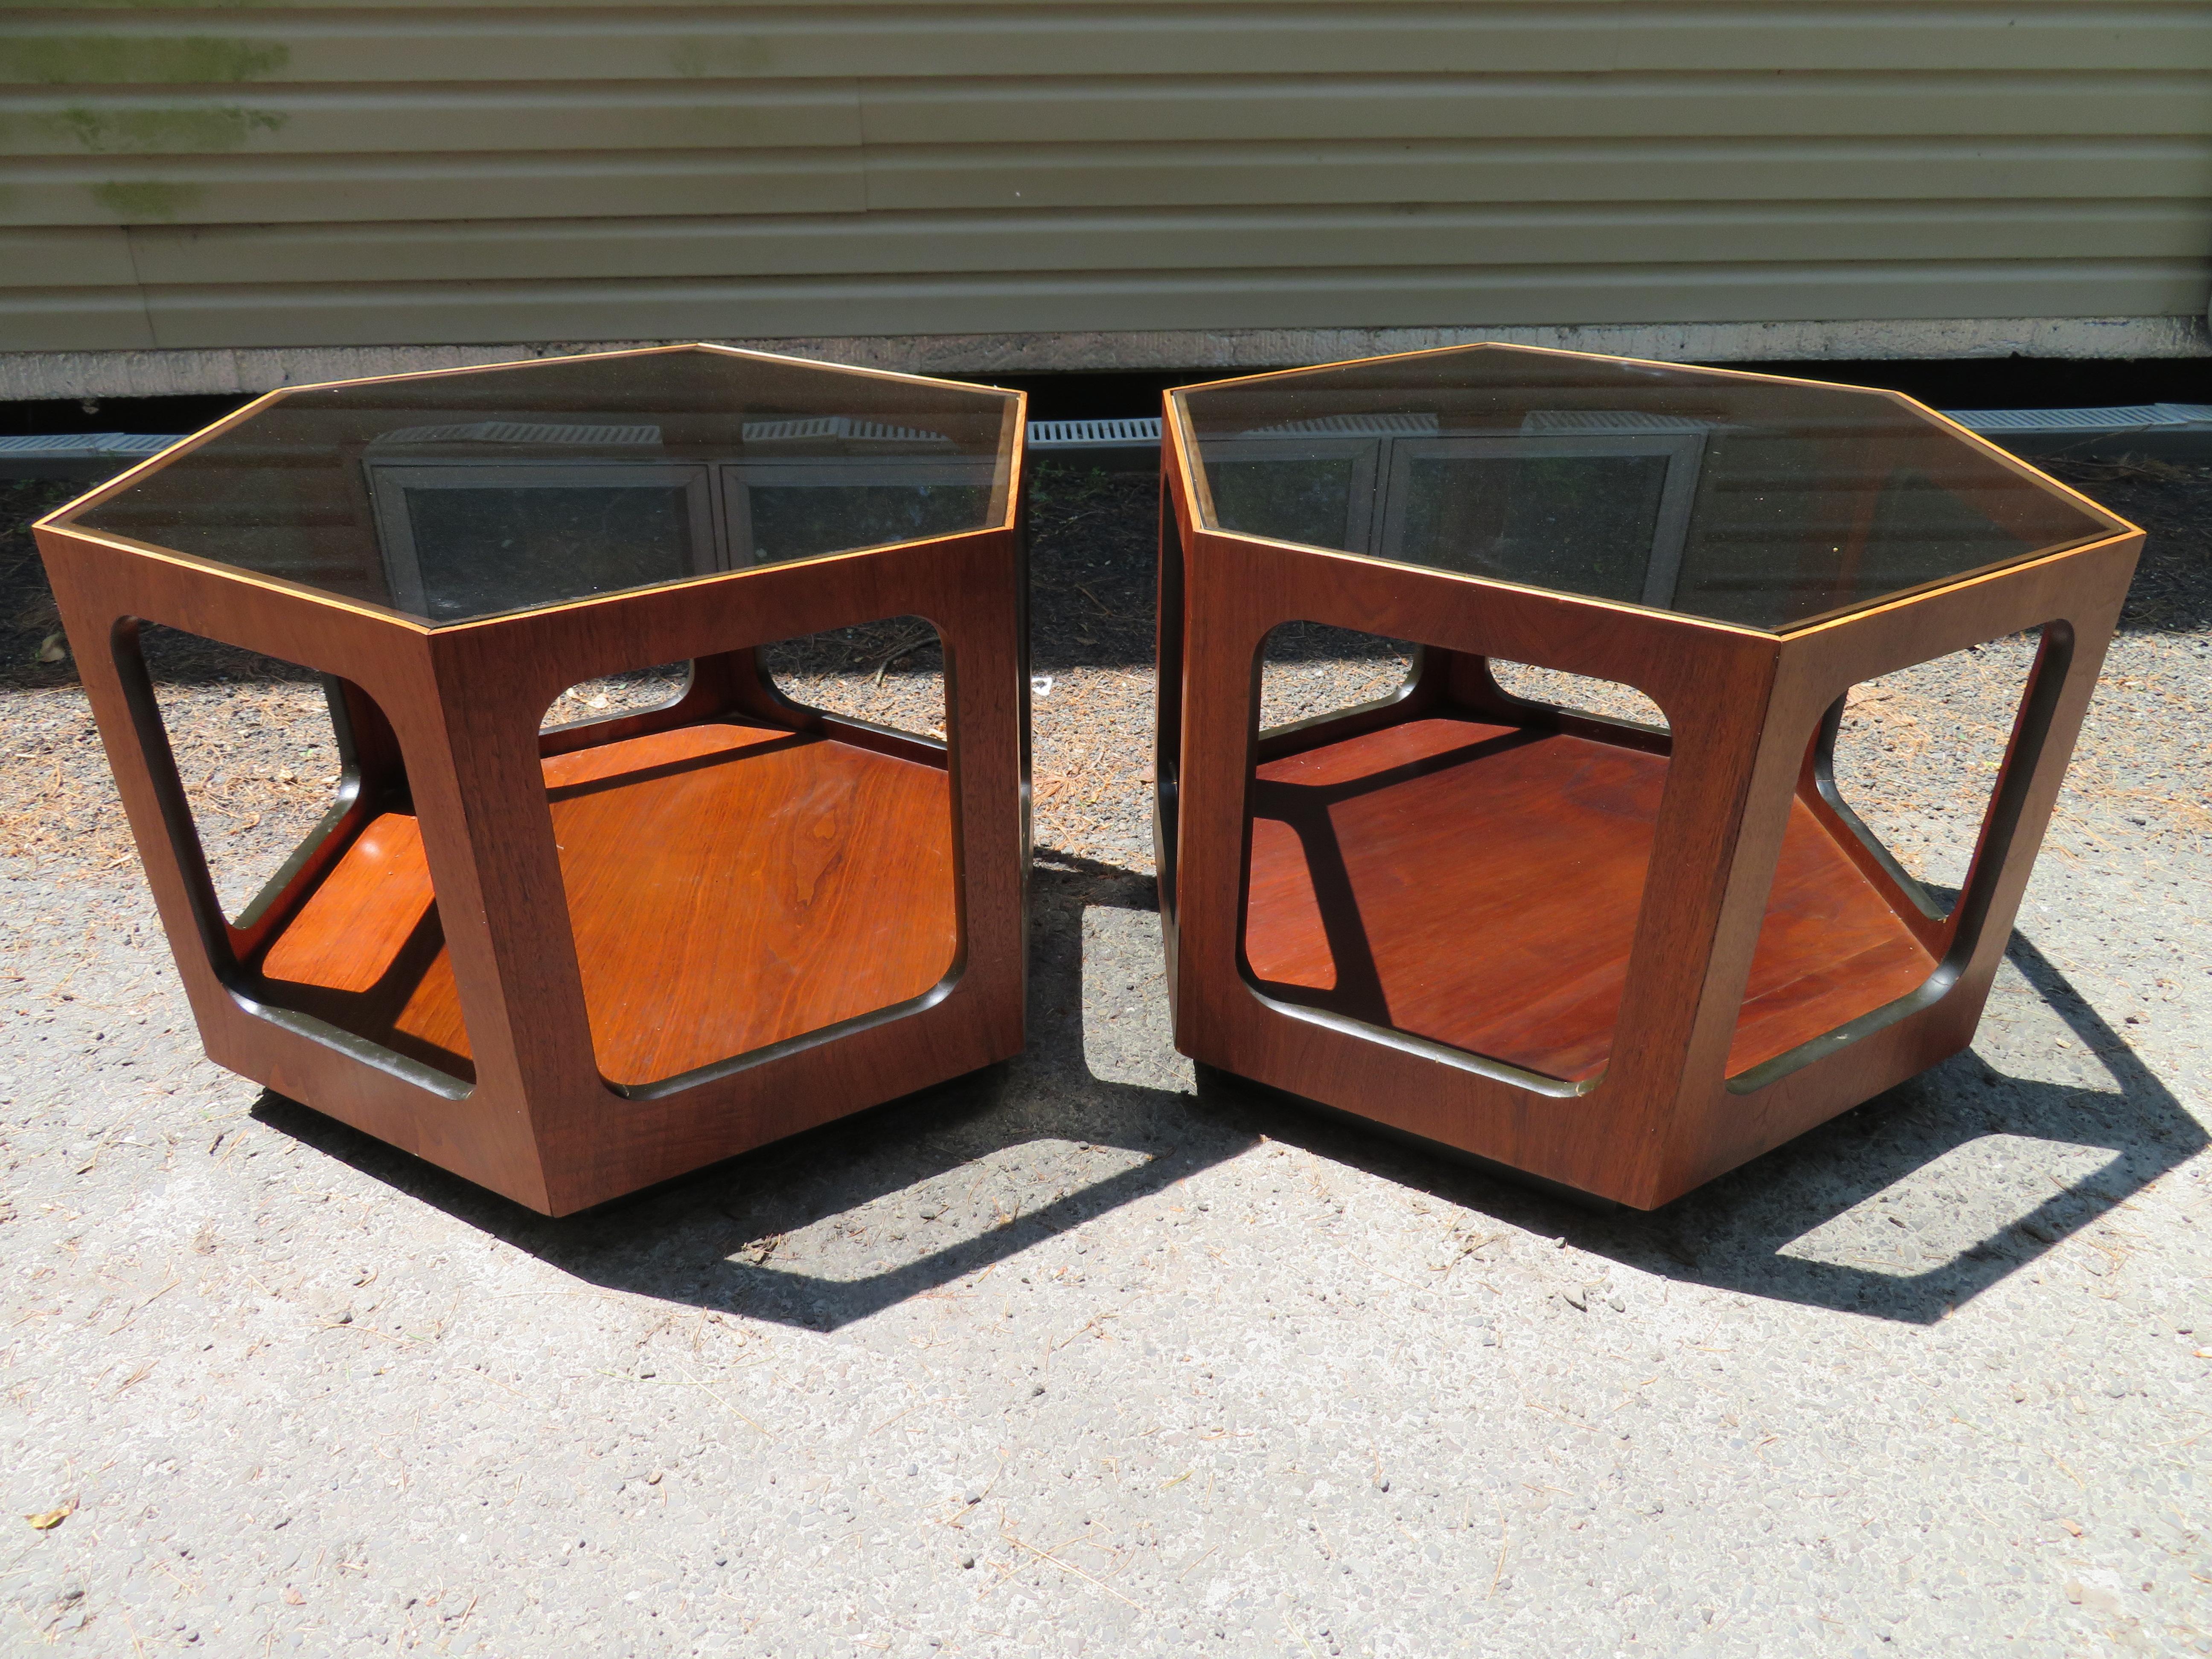 Wonderful pair of Lane octagon shaped glass and walnut side end tables. This pair is in very nice vintage condition and are the perfect size-not too big nor too small-just right! They measure 20